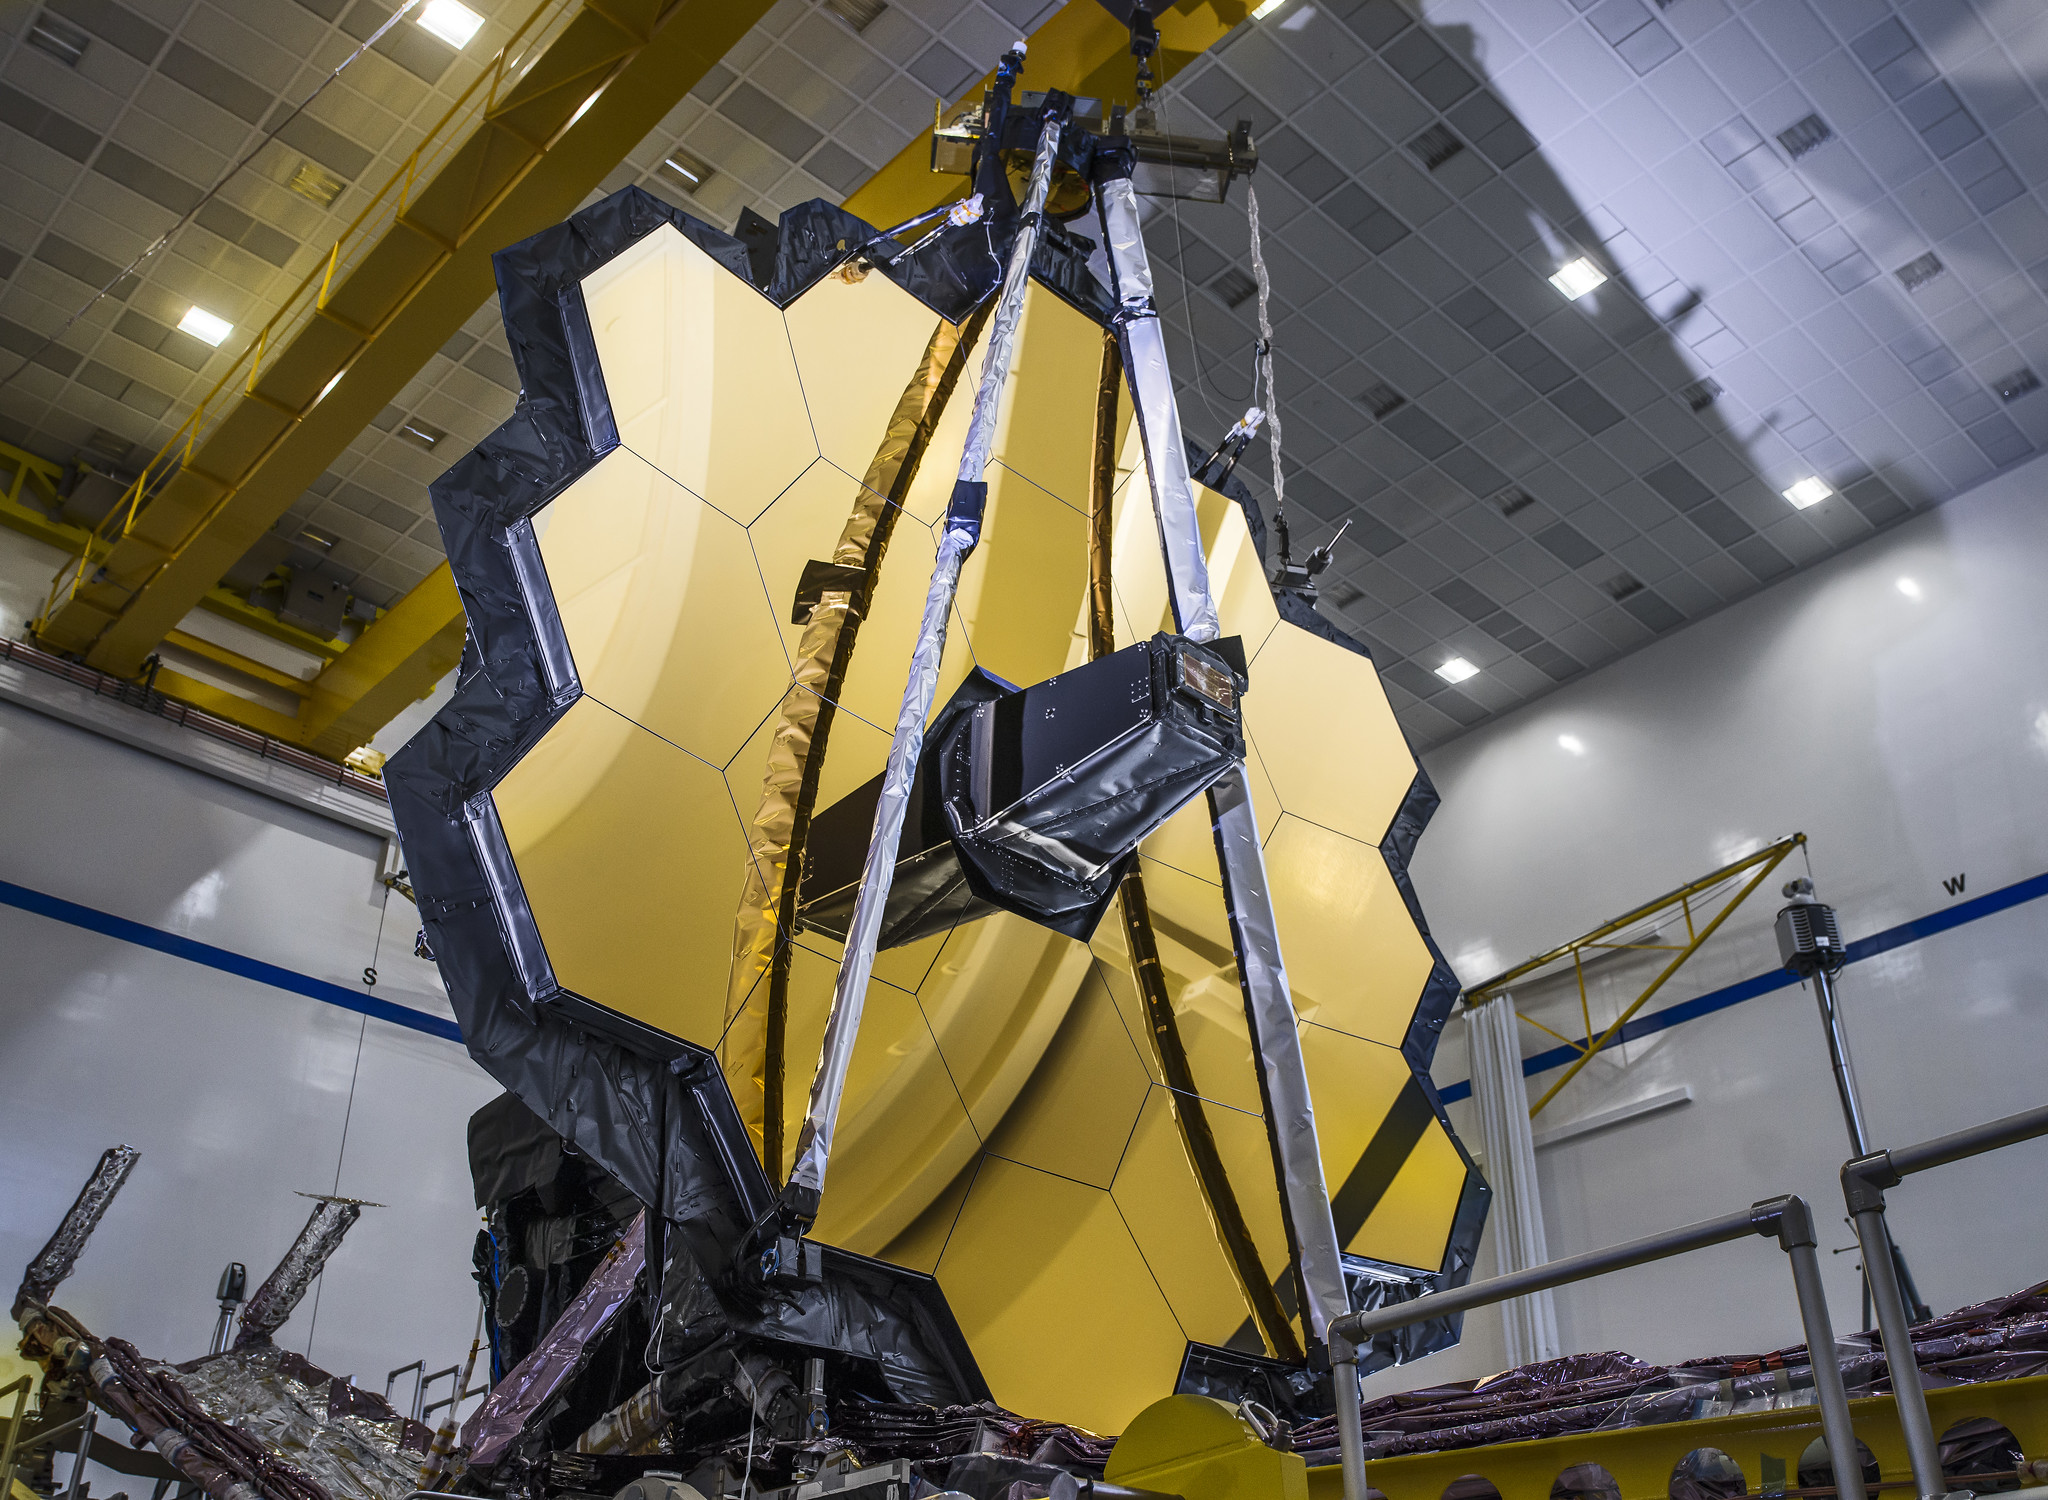 Looking up at the James Webb Space Telescope, assembled inside of a building. It looks like a hexagon of golden, honeycomb mirrors.